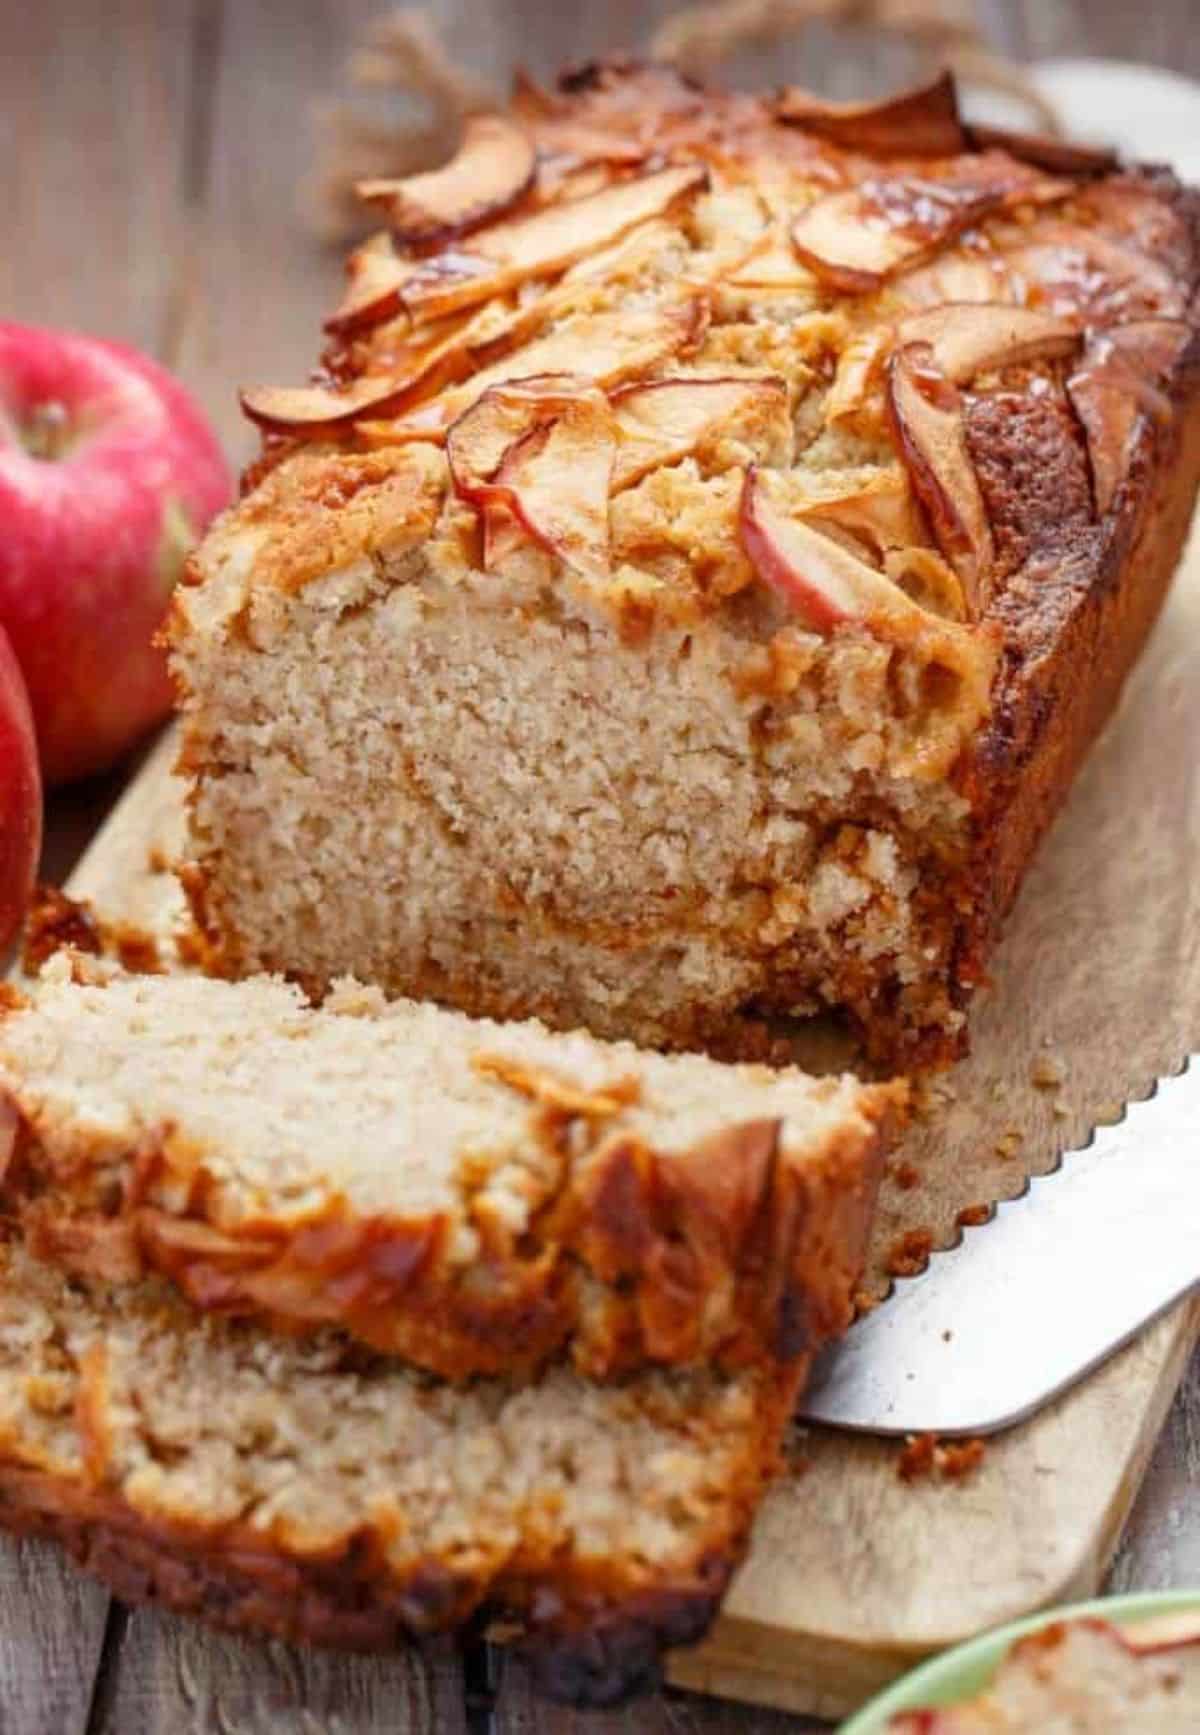 Partially sliced Apple Cinnamon Bread with Caramel on a wooden cutting board.